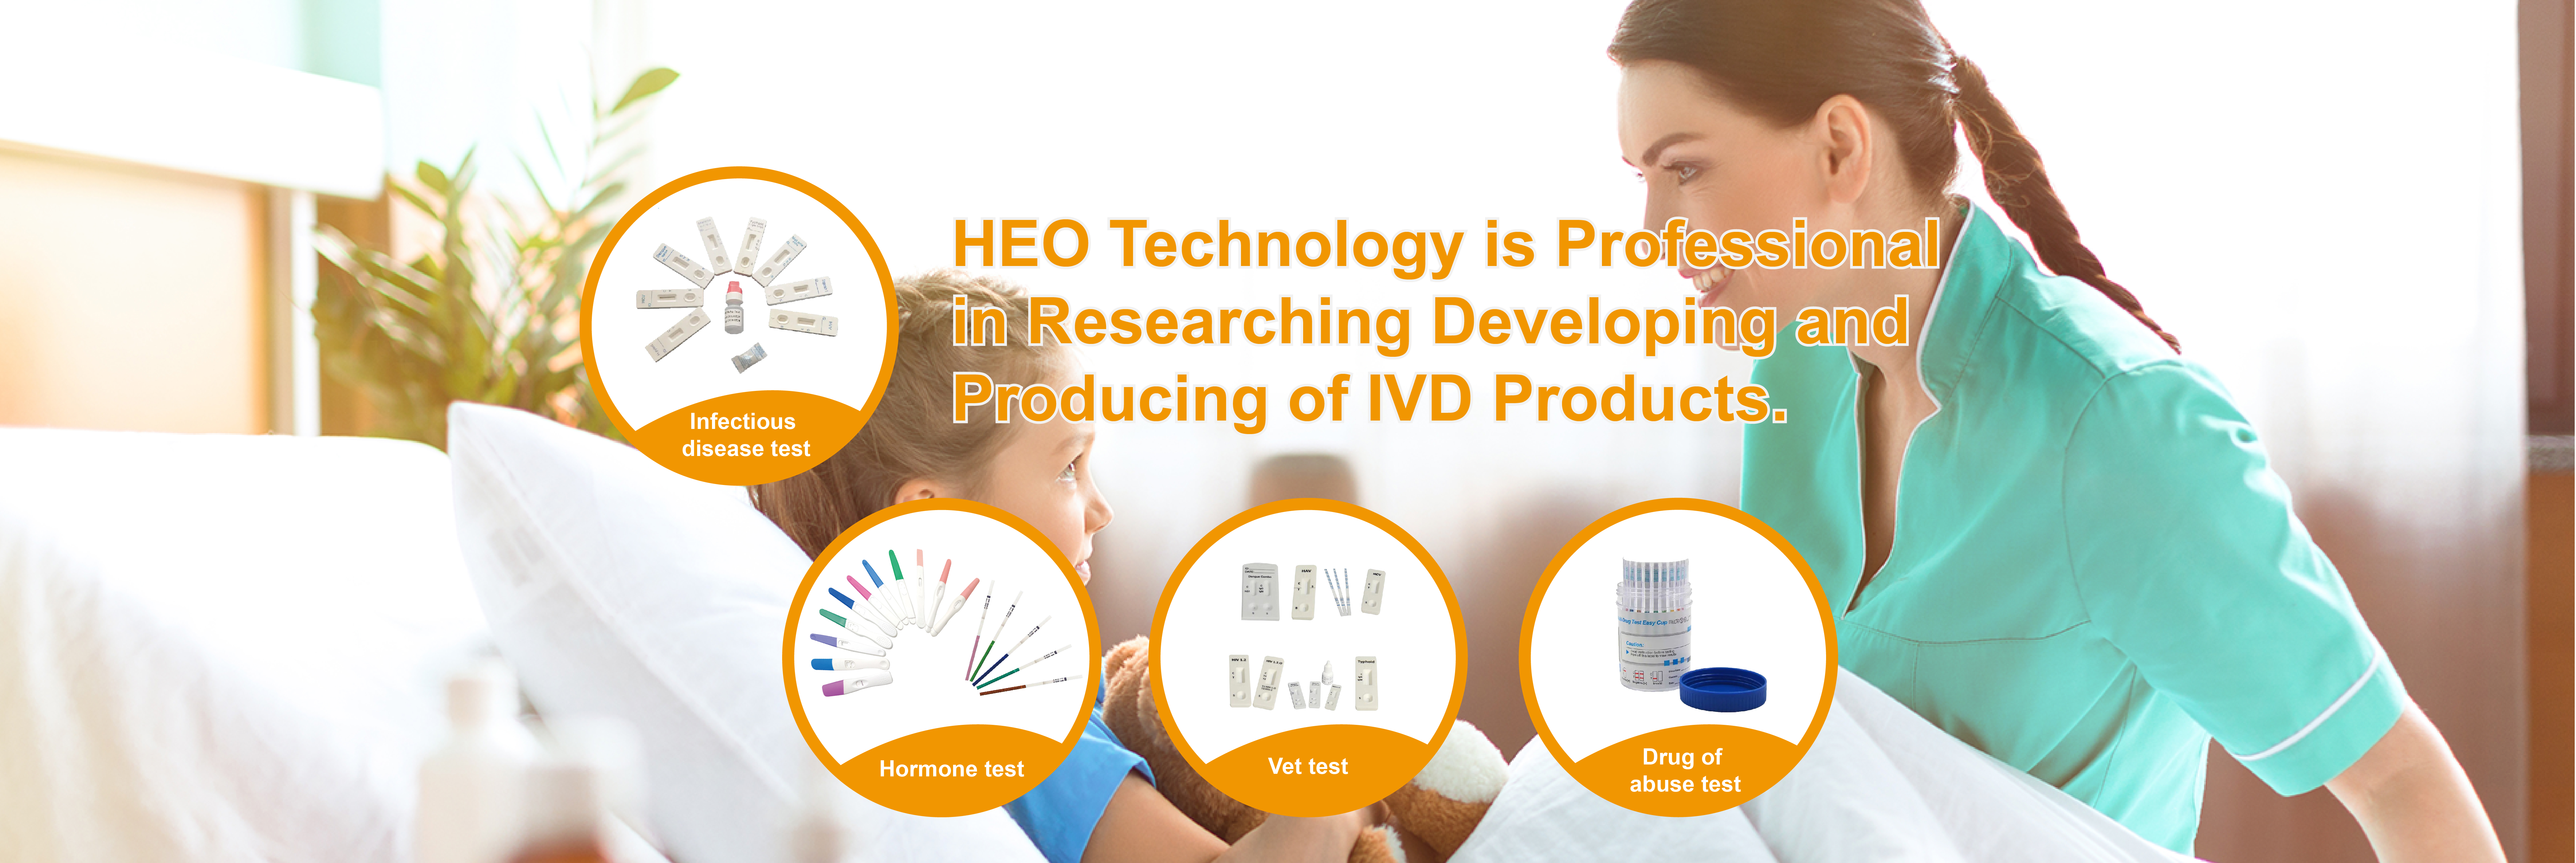 HEO TECHNOLOGY IVD TOOTE BANNER1